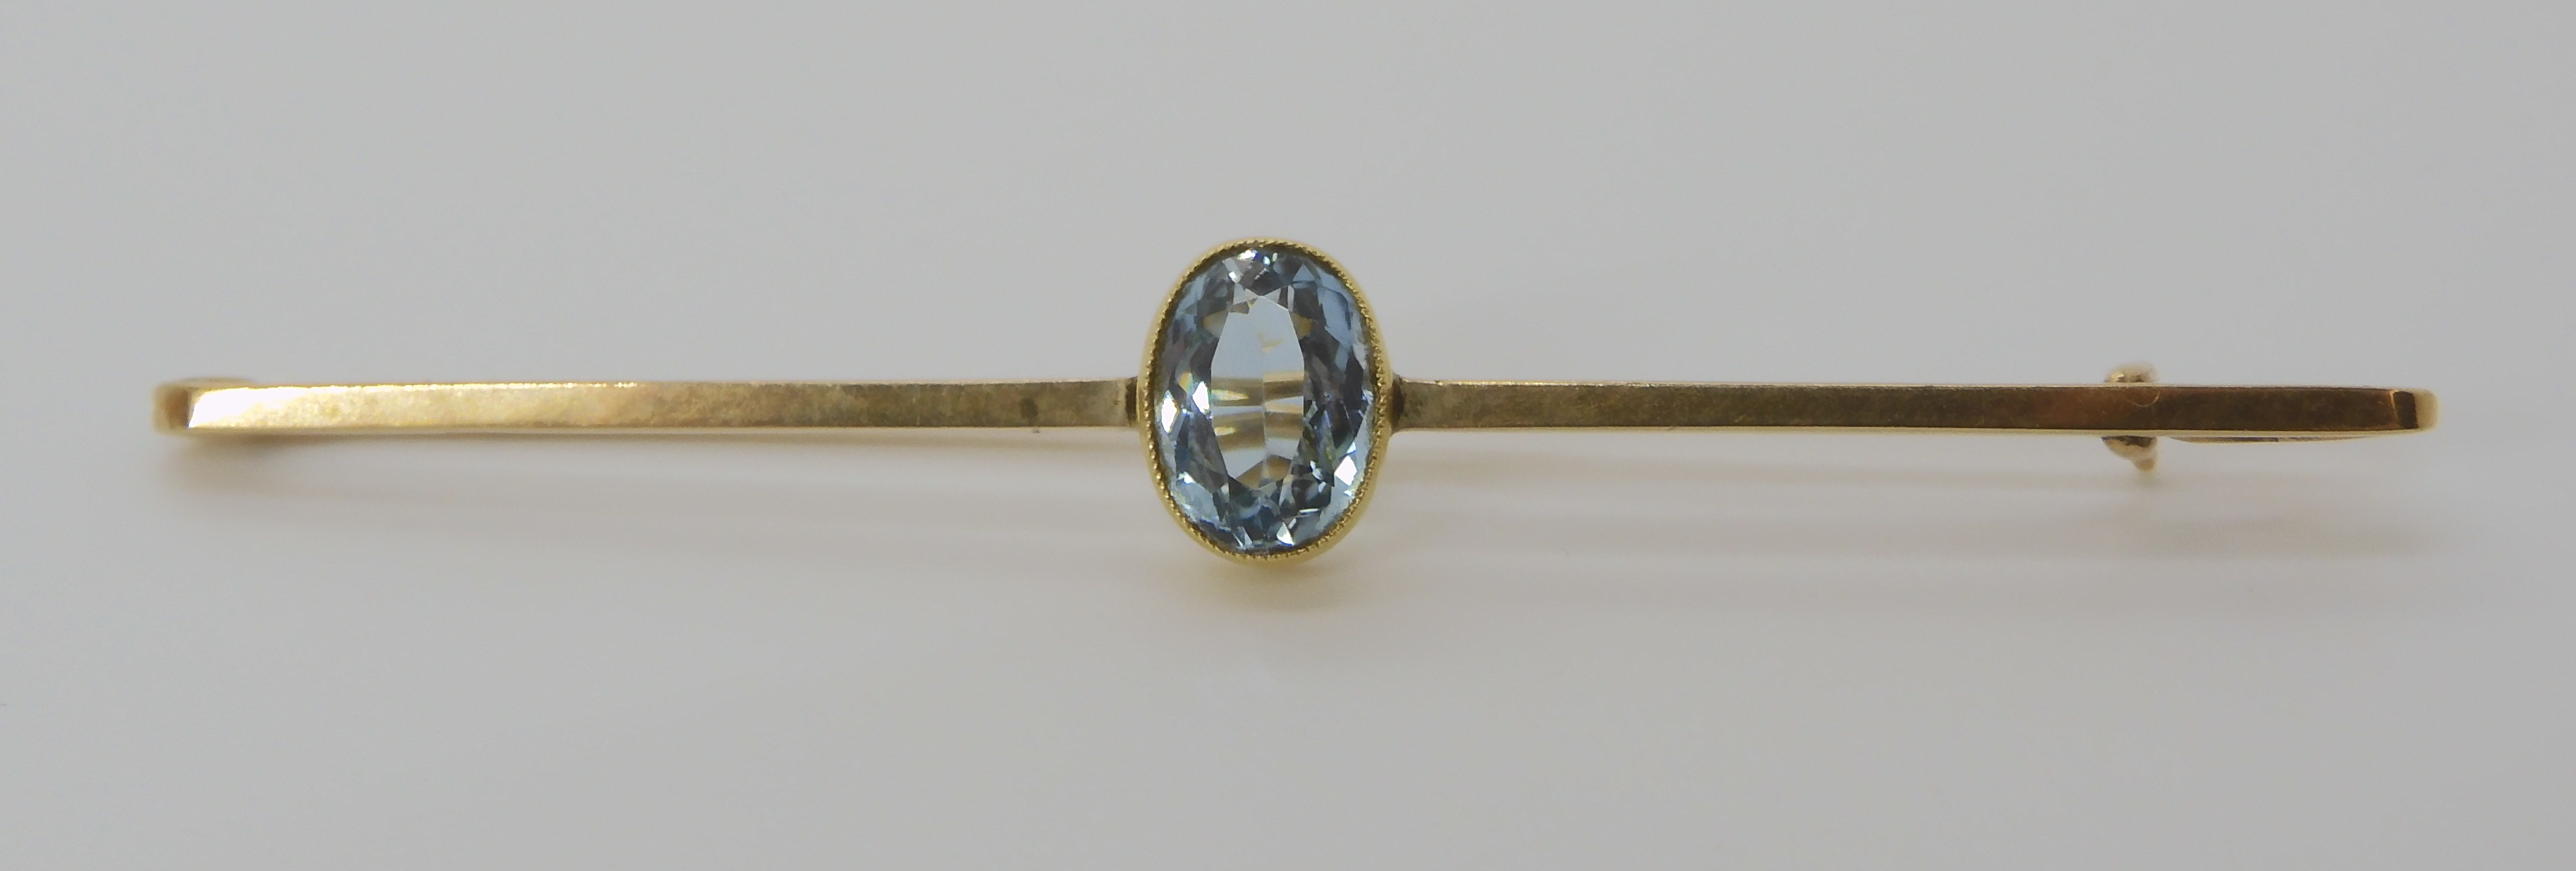 A COLLECTION OF 9CT GEM SET JEWELLERY comprising; an aquamarine bar brooch length 6.5cm, - Image 8 of 9